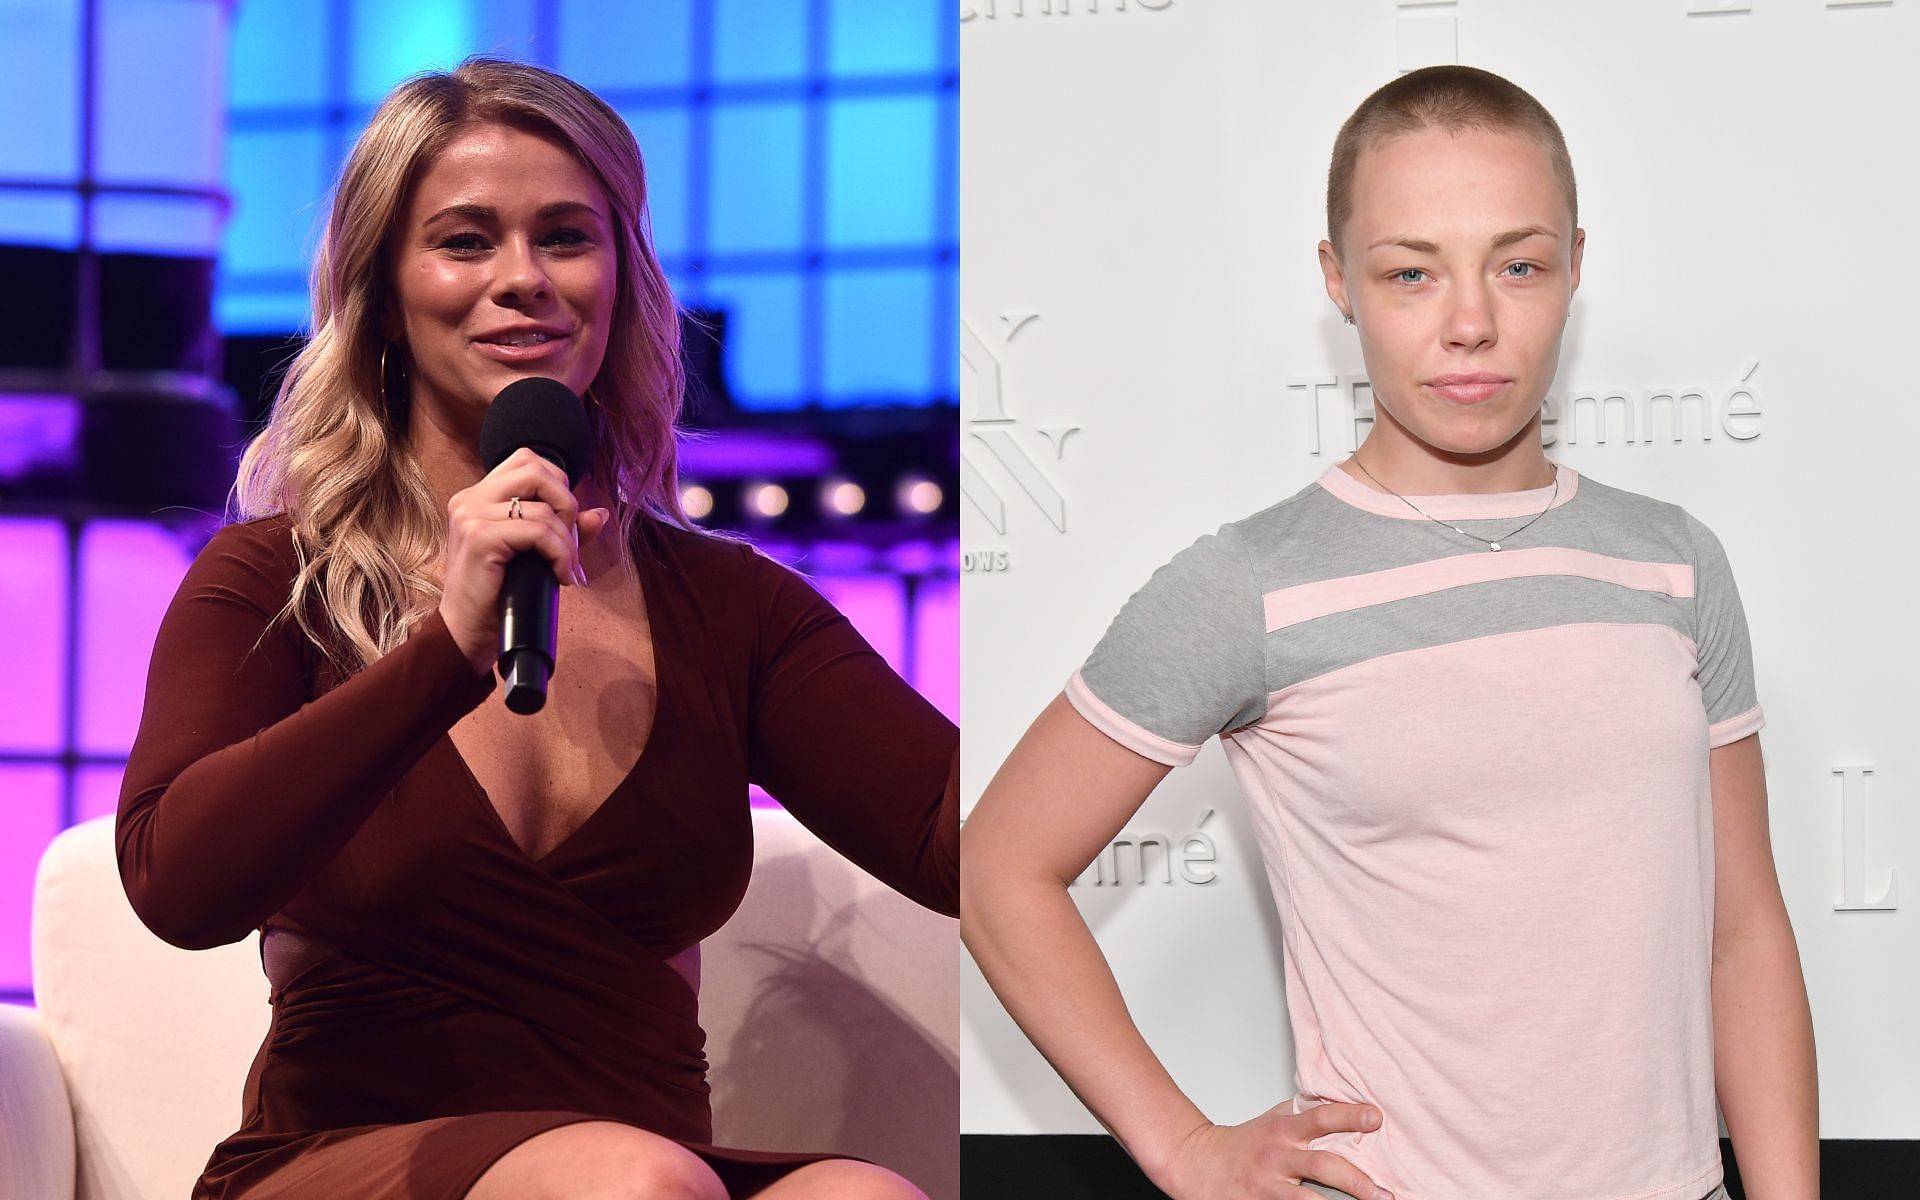 When Rose Namajunas (right) spoke on bald look before Paige VanZant (left) fight [Image via: Getty Images] 